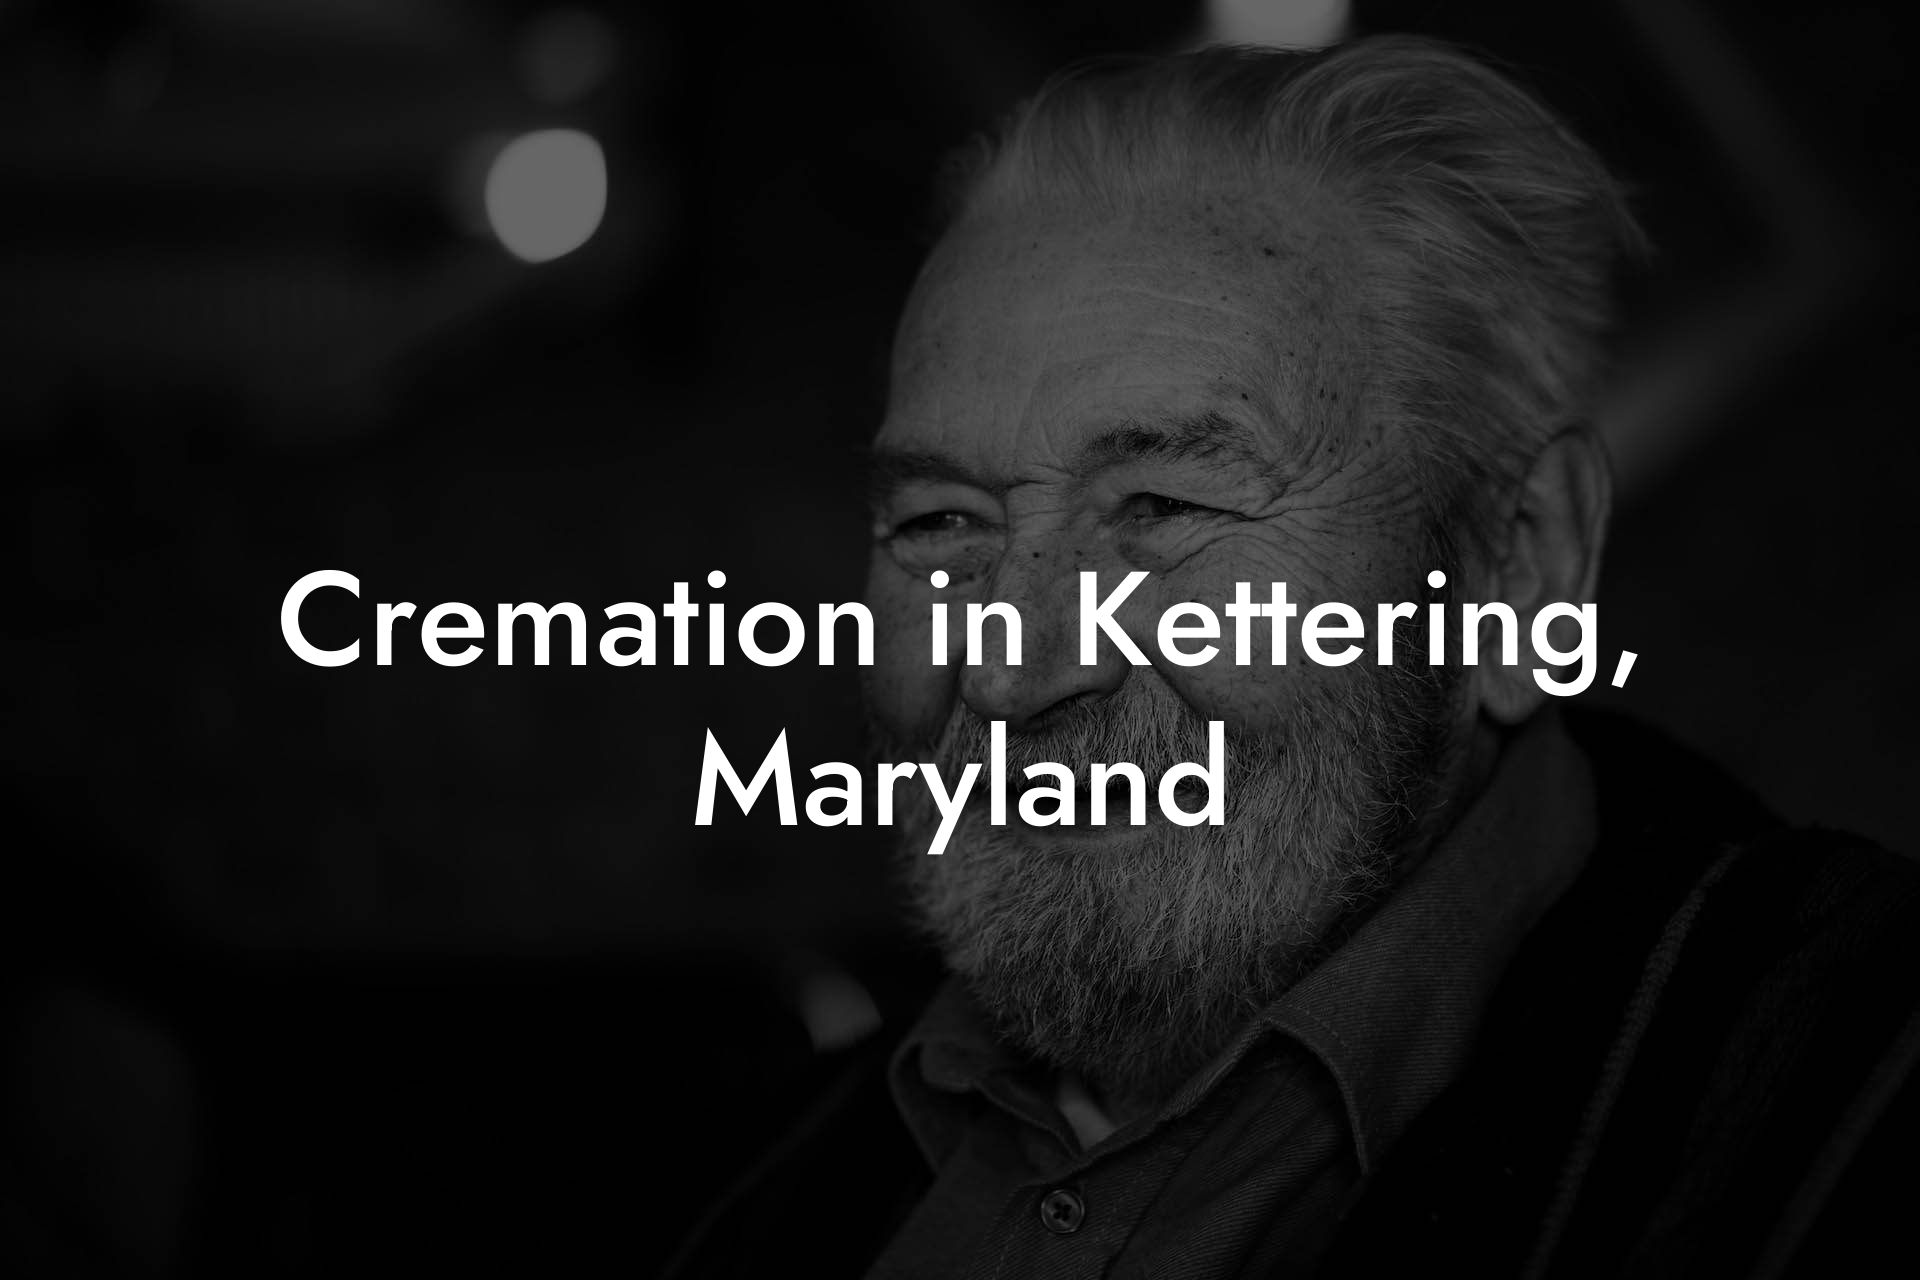 Cremation in Kettering, Maryland